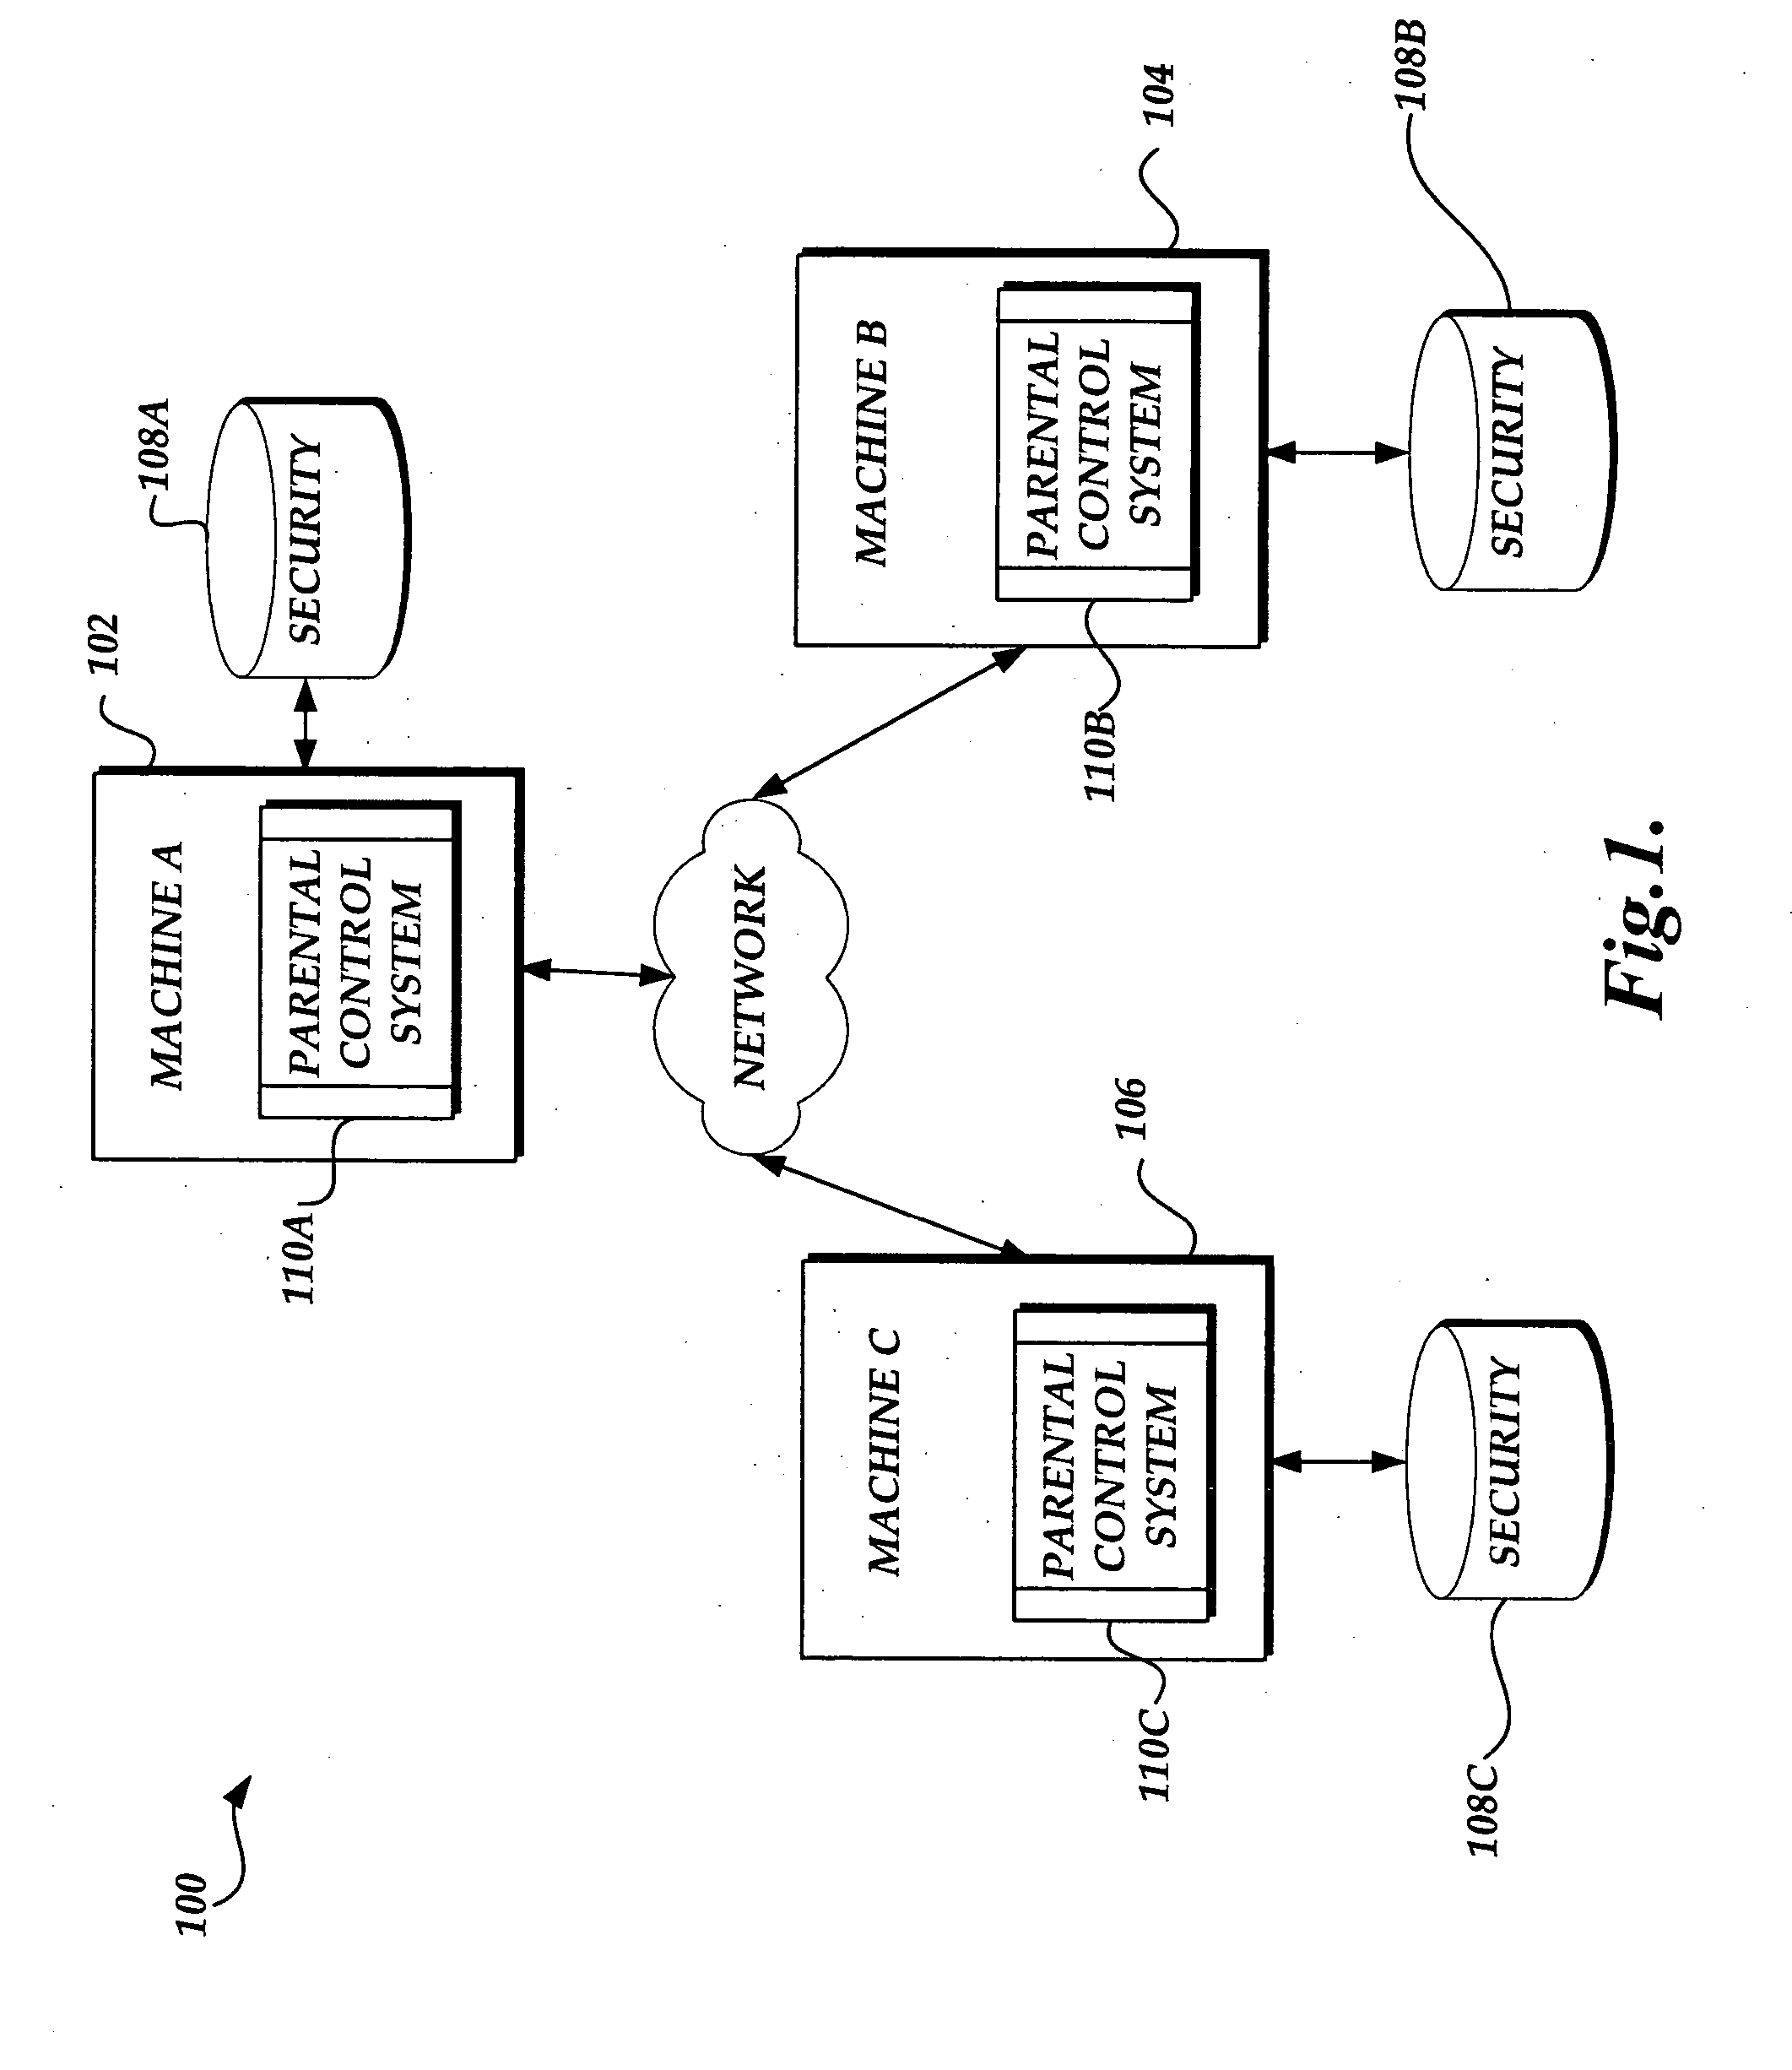 System and method for aggregating and extending parental controls auditing in a computer network